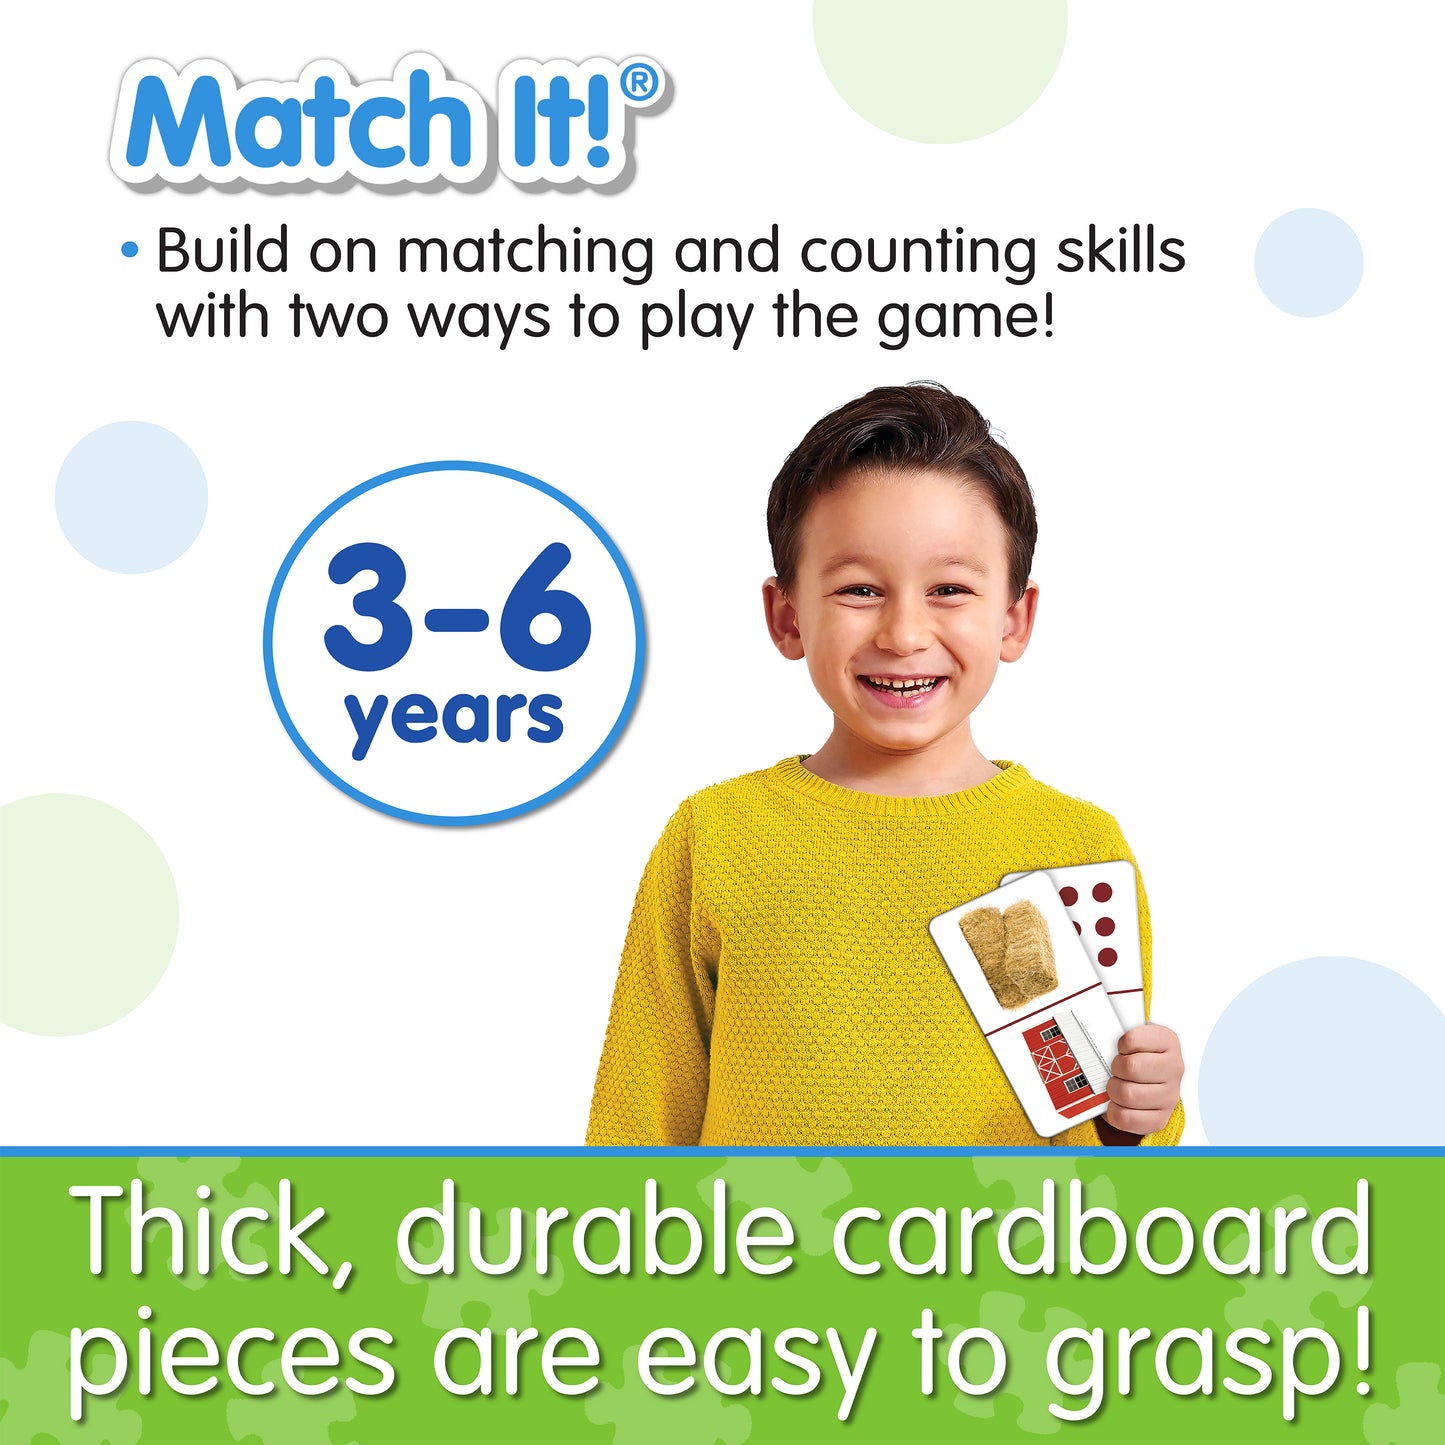 Infographic about Match It - Farminoes' features that says, "Thick, durable cardboard pieces are easy to grasp!"